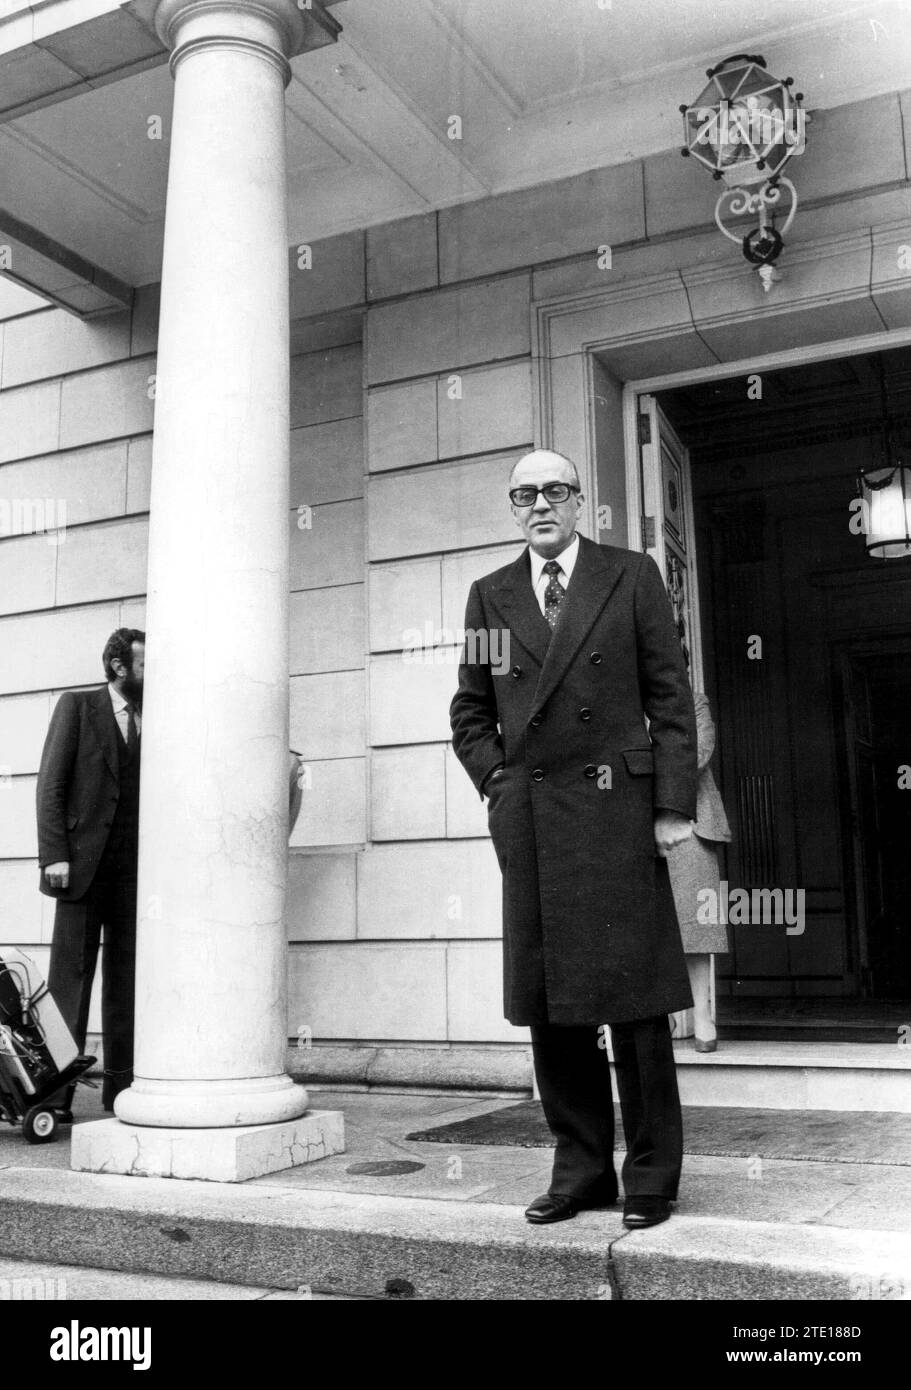 02/27/1981. Calvo Sotelo at the entrance to the Moncloa palace. Credit: Album / Archivo ABC / Luis Alonso Stock Photo